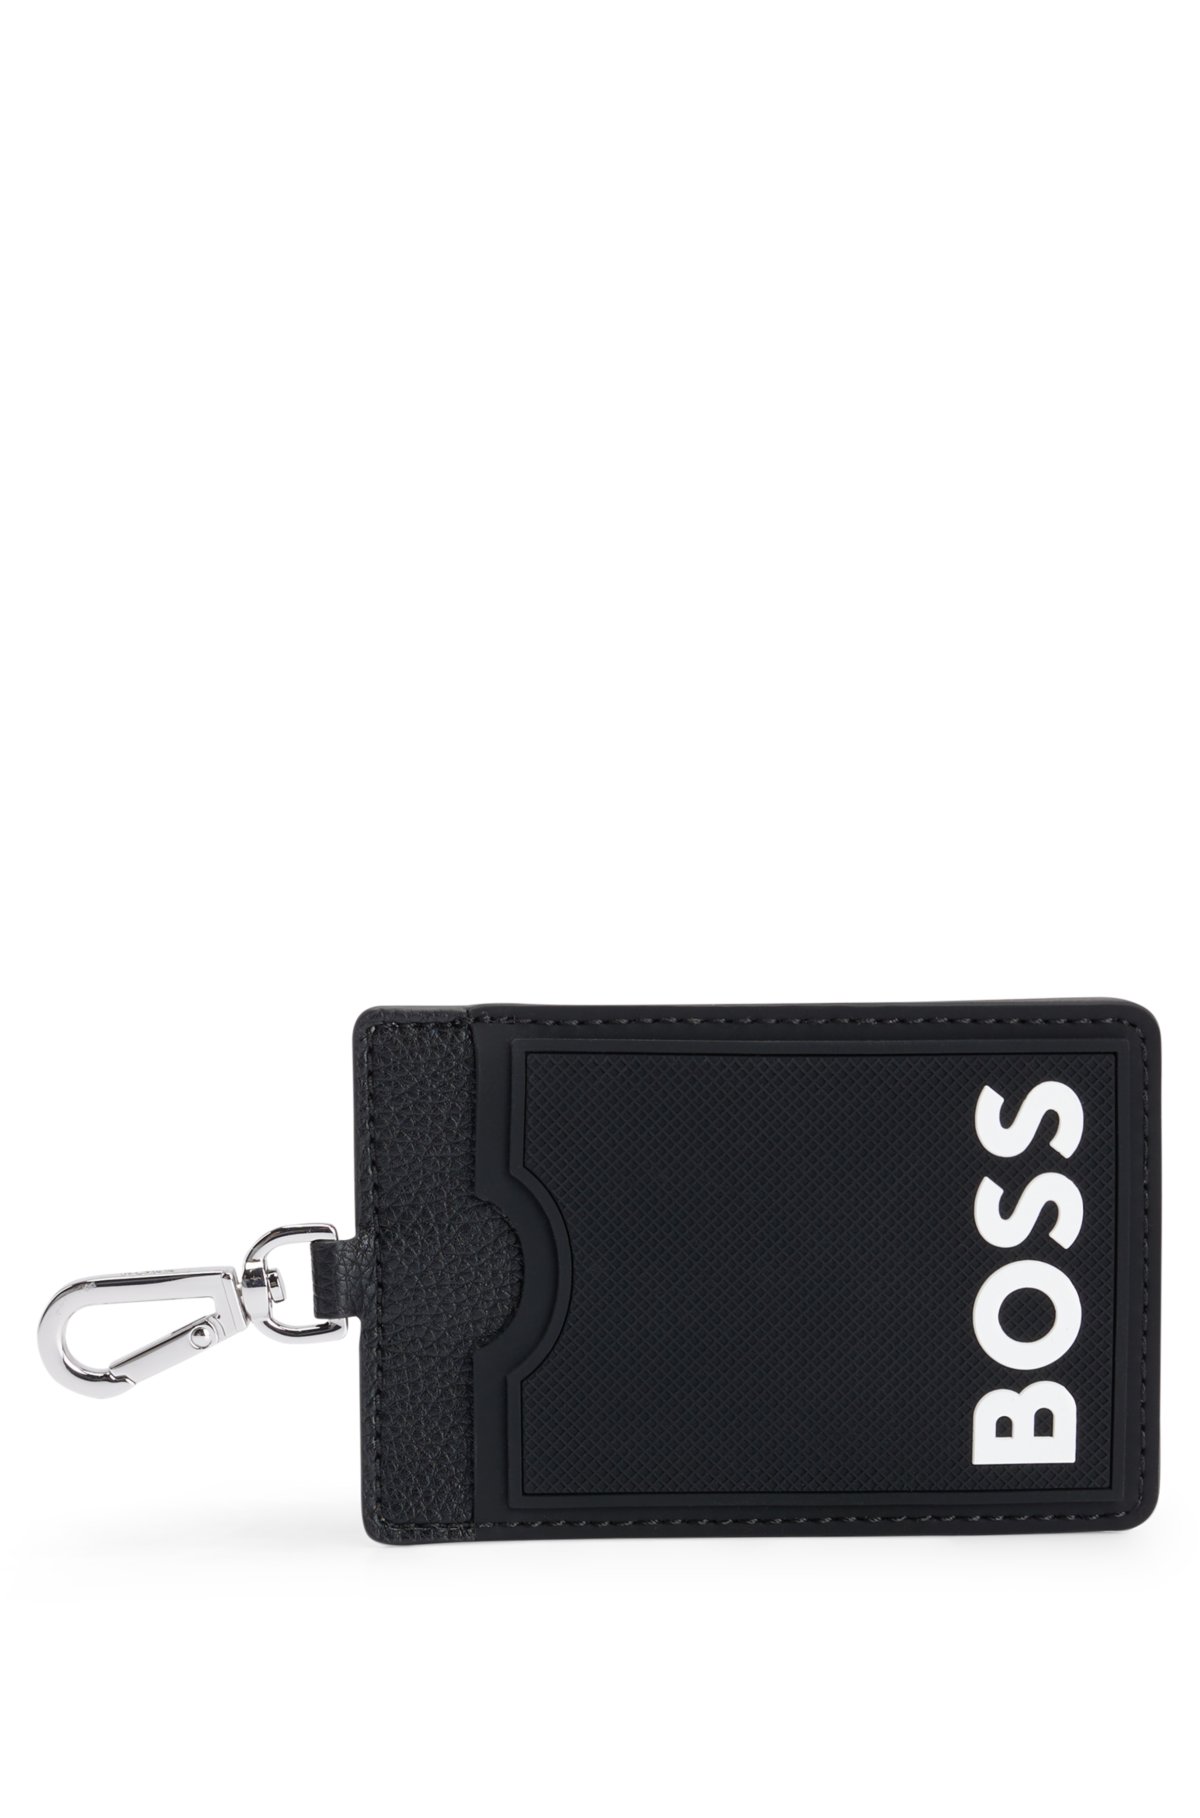 BOSS - Branded card and AirTag holder gift set